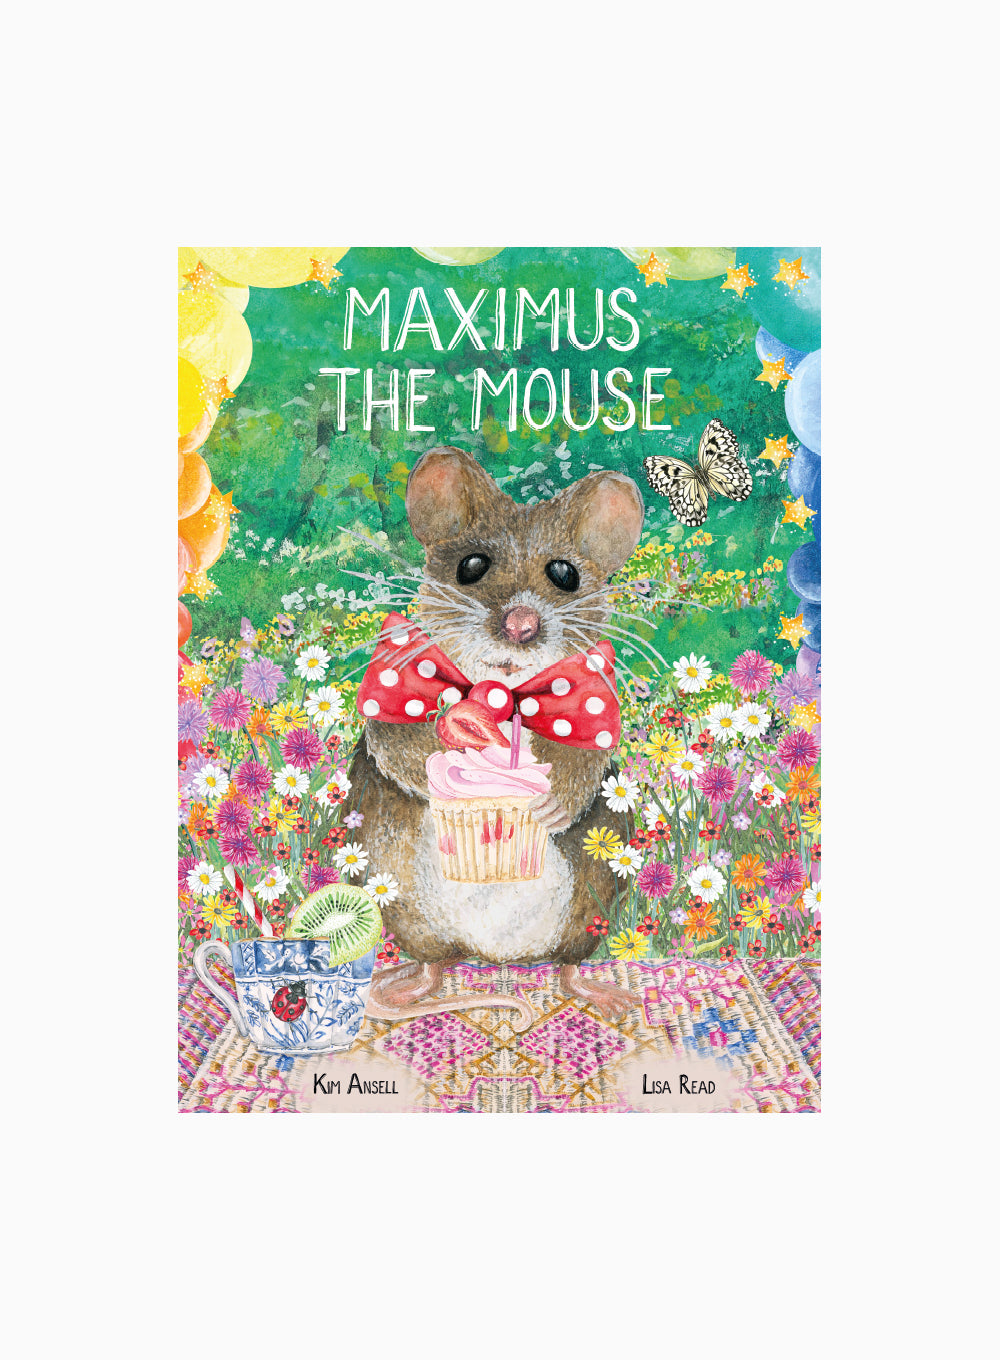 Maximus the Mouse